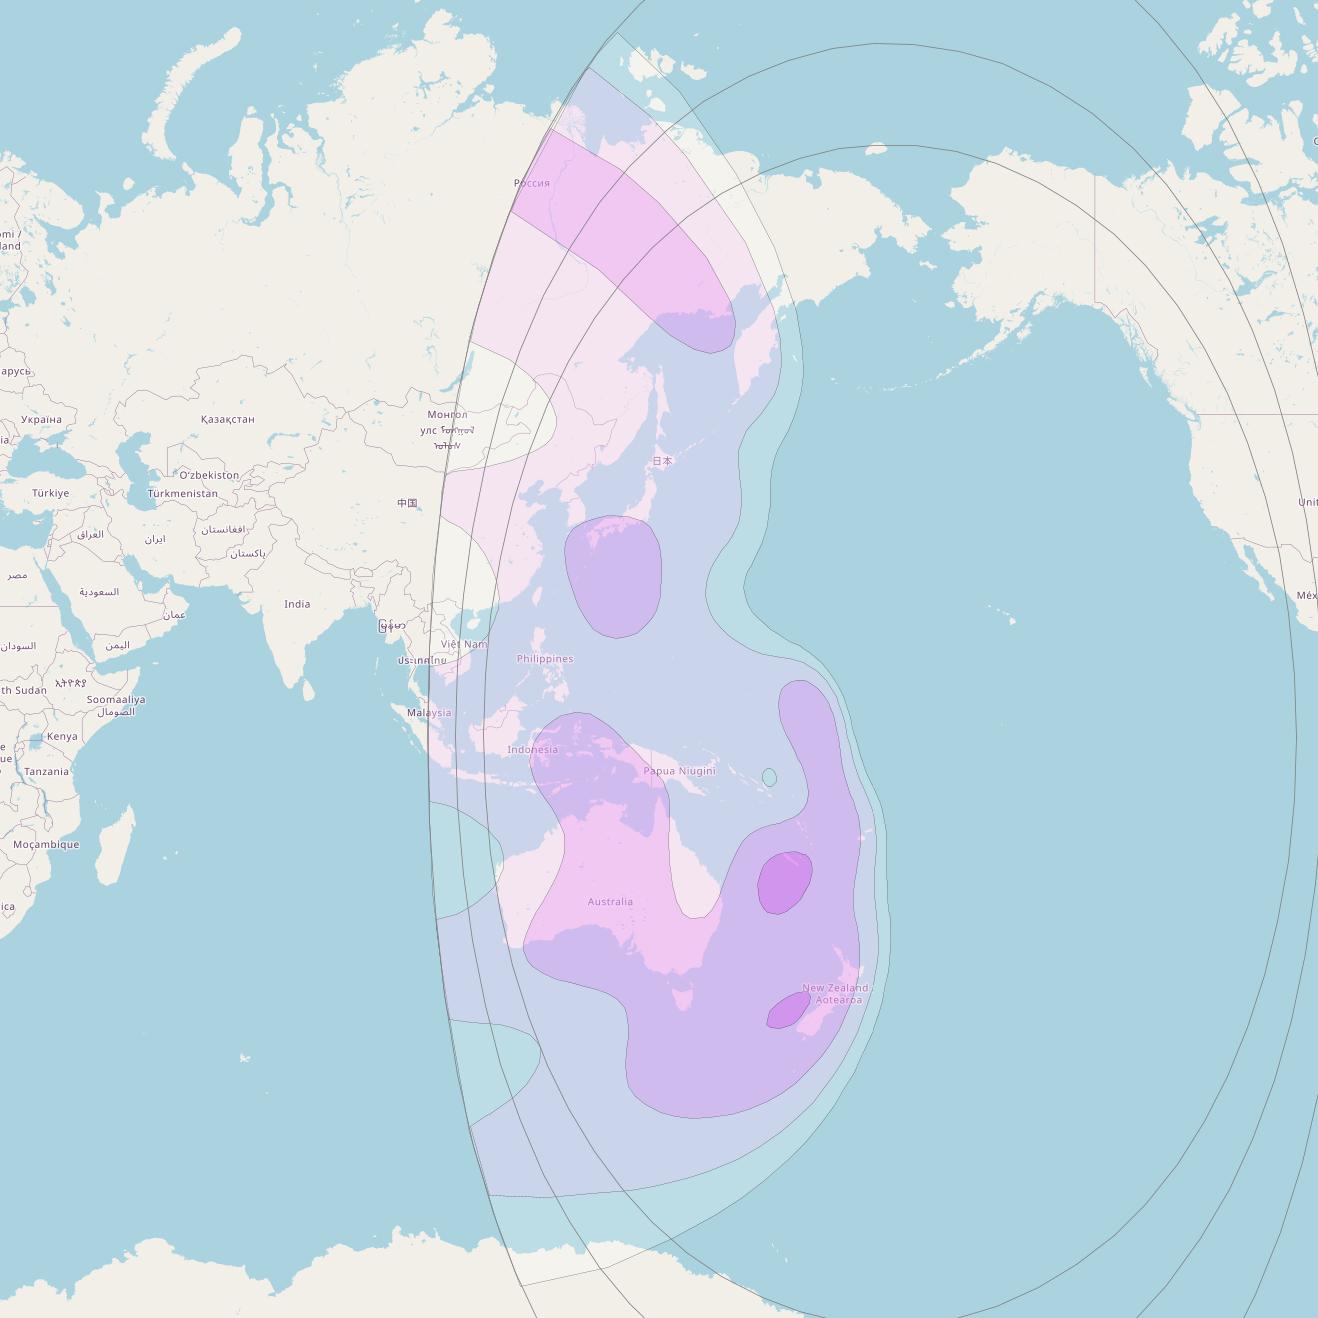 NSS 9 at 177° W downlink C-band West Hemi Beam coverage map